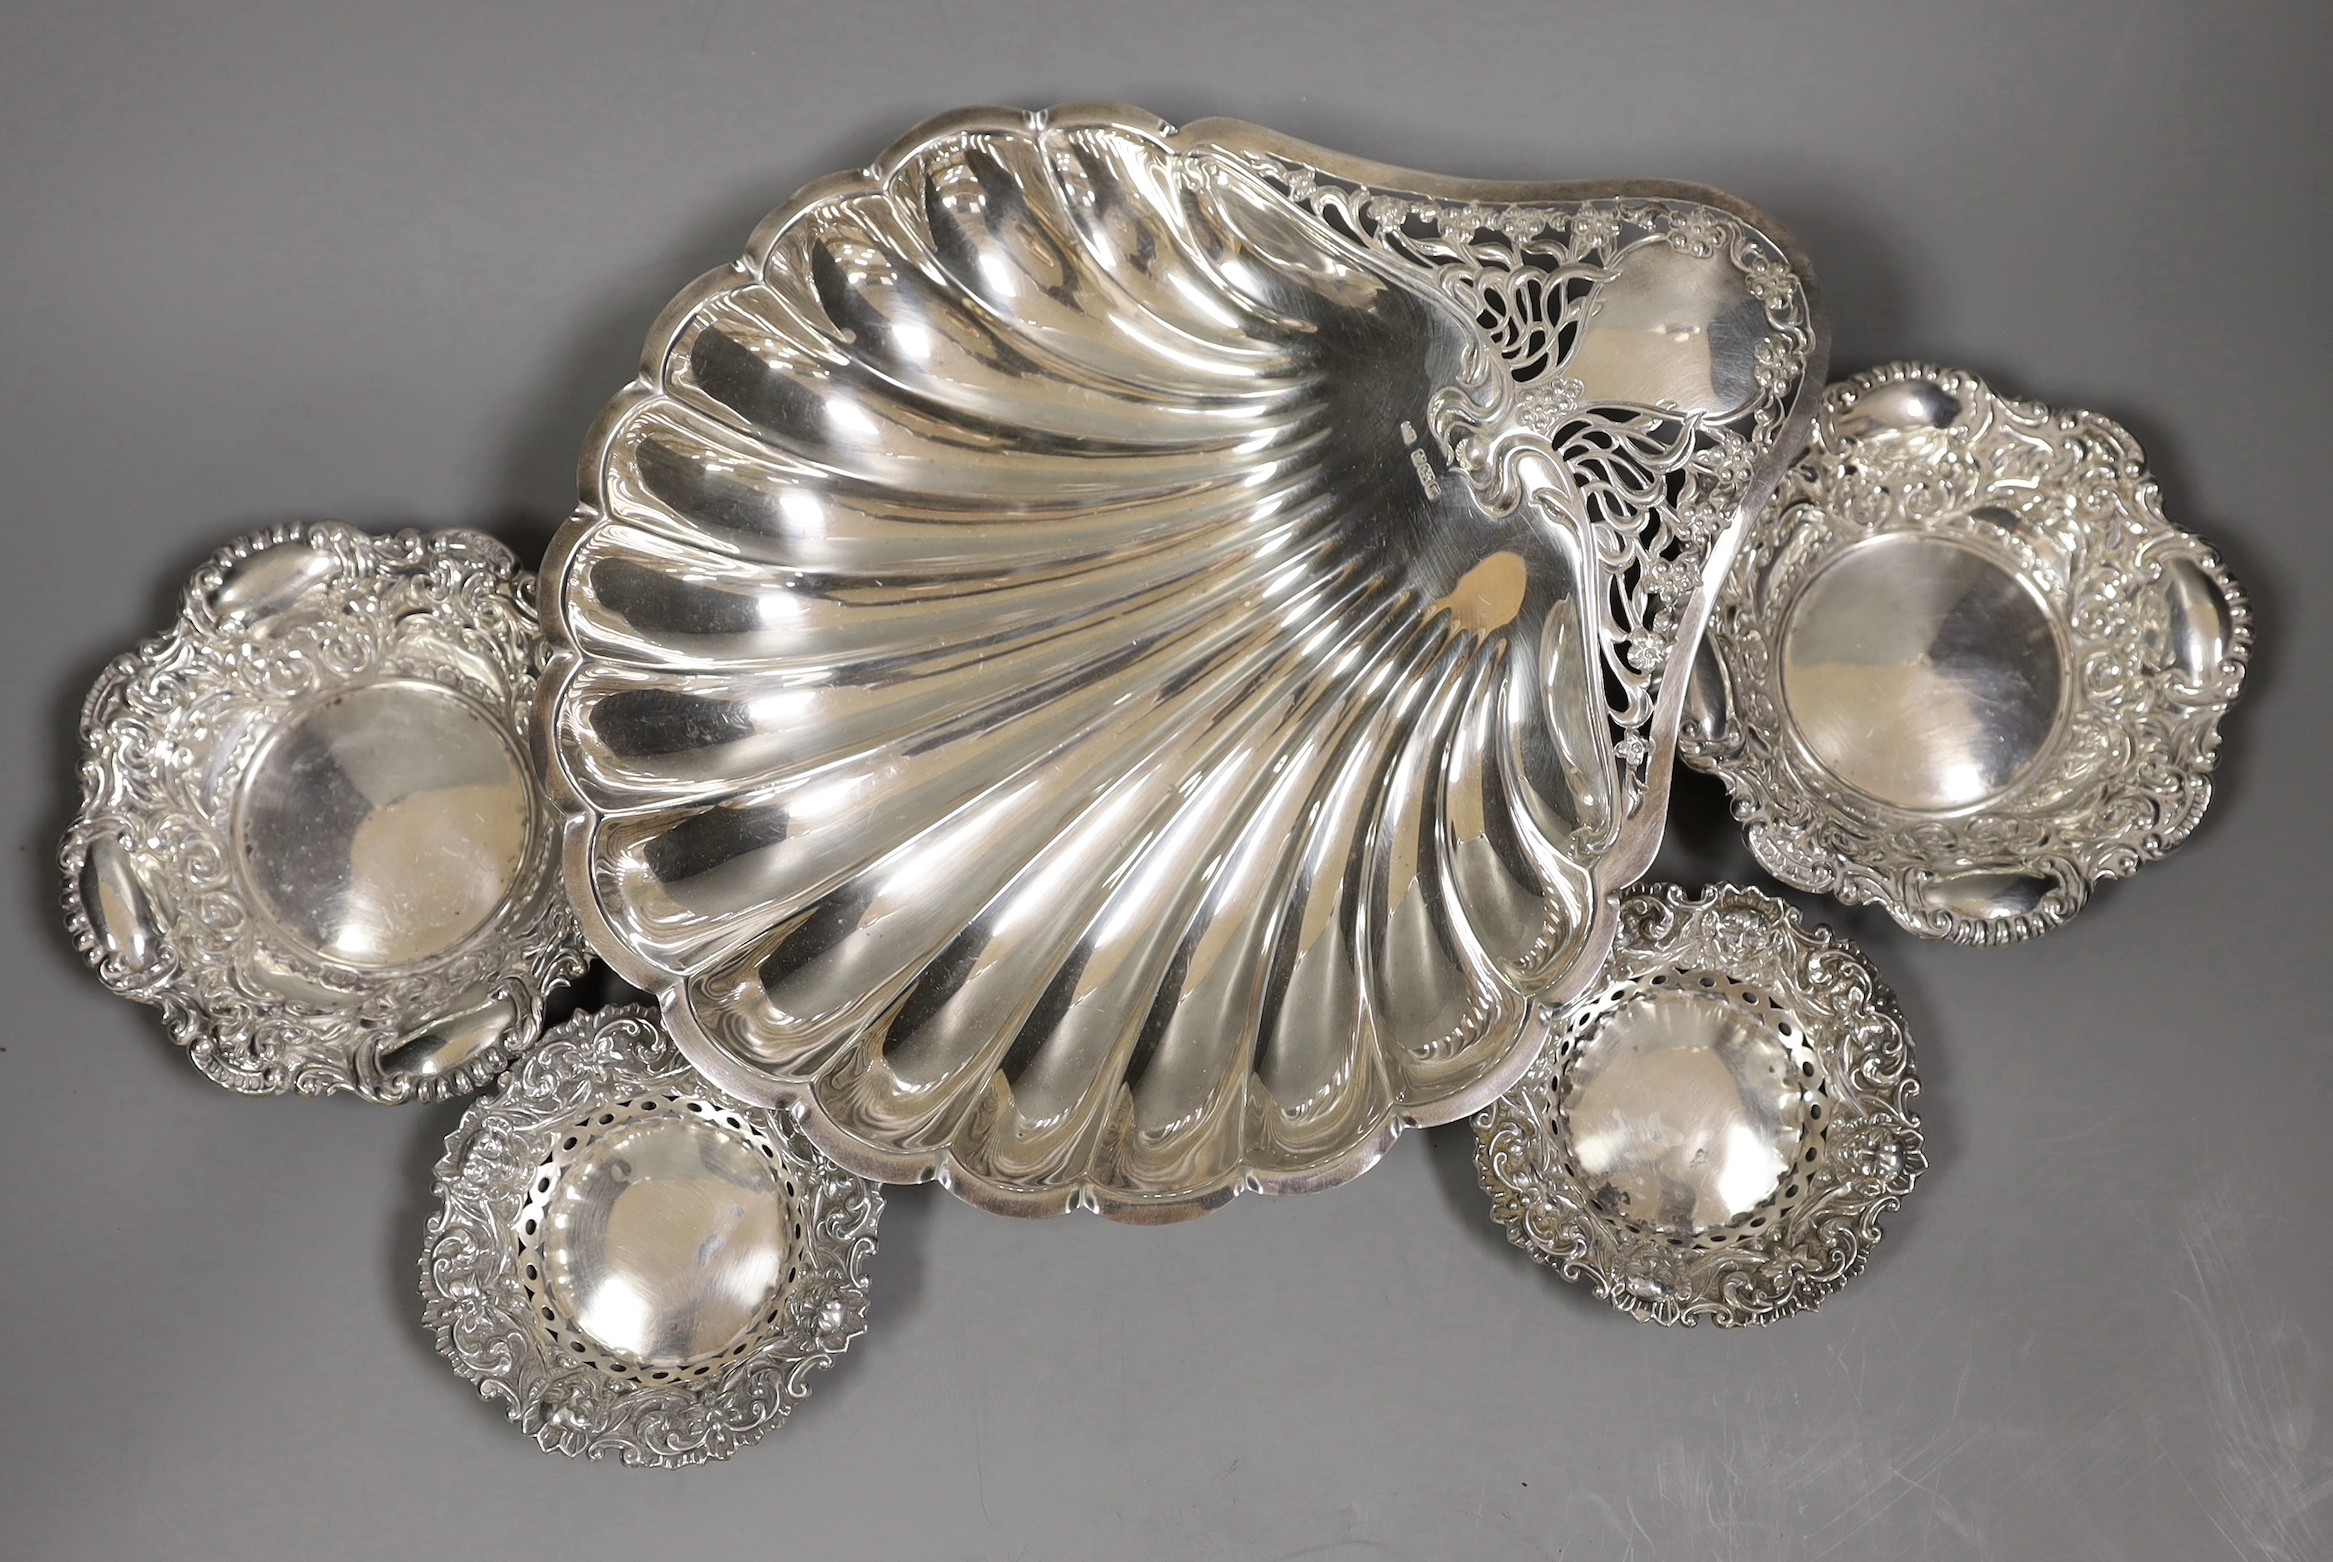 An Edwardian Art Nouveau silver shell dish, with pierced handle, on ball feet, Atkin Brothers, Sheffield, 1905, 28.3cm, together with two small pairs of repousse silver bonbon dishes, 16oz.